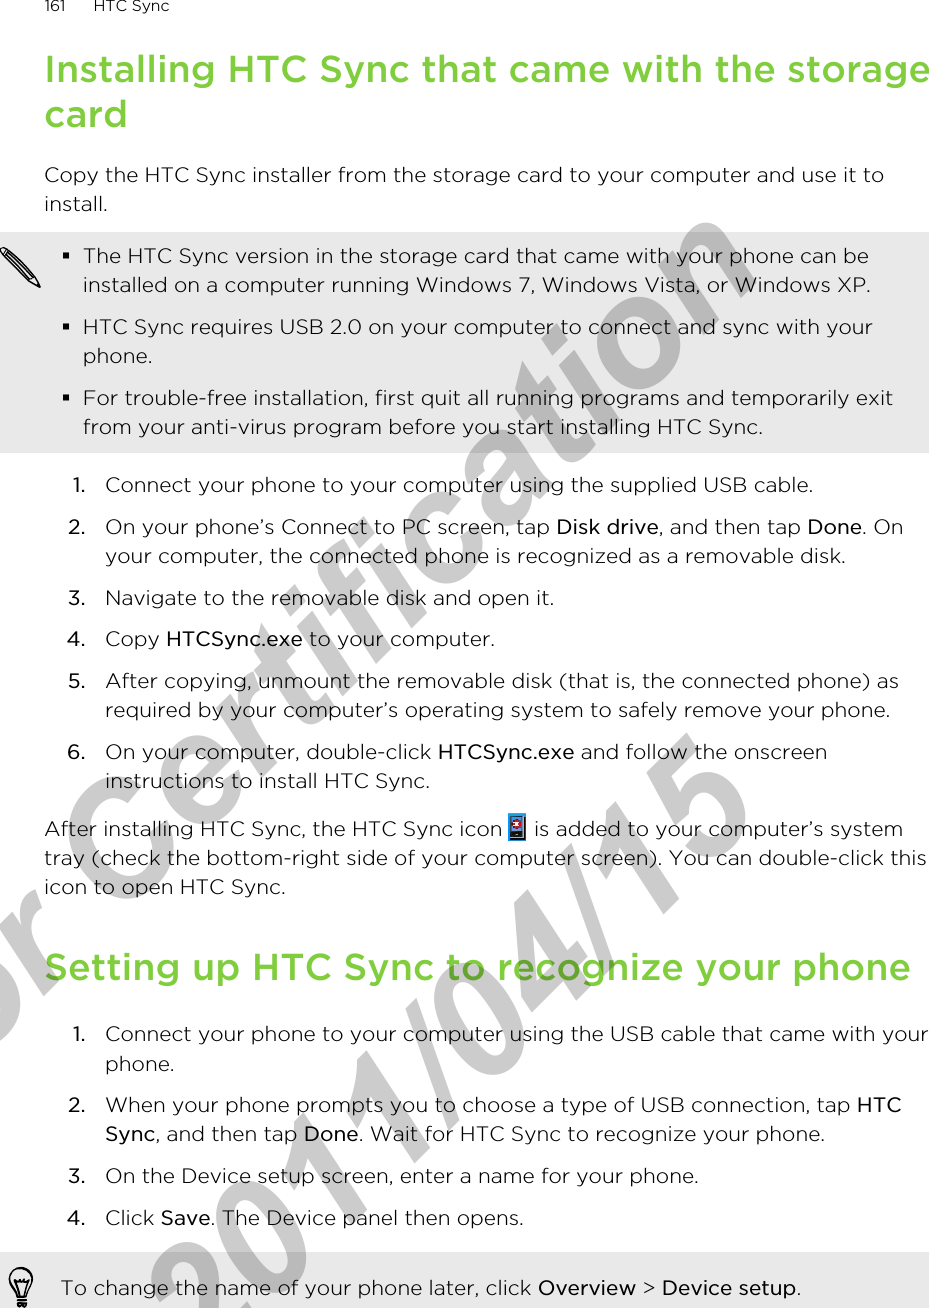 Installing HTC Sync that came with the storagecardCopy the HTC Sync installer from the storage card to your computer and use it toinstall.§The HTC Sync version in the storage card that came with your phone can beinstalled on a computer running Windows 7, Windows Vista, or Windows XP.§HTC Sync requires USB 2.0 on your computer to connect and sync with yourphone.§For trouble-free installation, first quit all running programs and temporarily exitfrom your anti-virus program before you start installing HTC Sync.1. Connect your phone to your computer using the supplied USB cable.2. On your phone’s Connect to PC screen, tap Disk drive, and then tap Done. Onyour computer, the connected phone is recognized as a removable disk.3. Navigate to the removable disk and open it.4. Copy HTCSync.exe to your computer.5. After copying, unmount the removable disk (that is, the connected phone) asrequired by your computer’s operating system to safely remove your phone.6. On your computer, double-click HTCSync.exe and follow the onscreeninstructions to install HTC Sync.After installing HTC Sync, the HTC Sync icon   is added to your computer’s systemtray (check the bottom-right side of your computer screen). You can double-click thisicon to open HTC Sync.Setting up HTC Sync to recognize your phone1. Connect your phone to your computer using the USB cable that came with yourphone.2. When your phone prompts you to choose a type of USB connection, tap HTCSync, and then tap Done. Wait for HTC Sync to recognize your phone.3. On the Device setup screen, enter a name for your phone.4. Click Save. The Device panel then opens.To change the name of your phone later, click Overview &gt; Device setup.161 HTC Syncfor Certification  2011/04/15